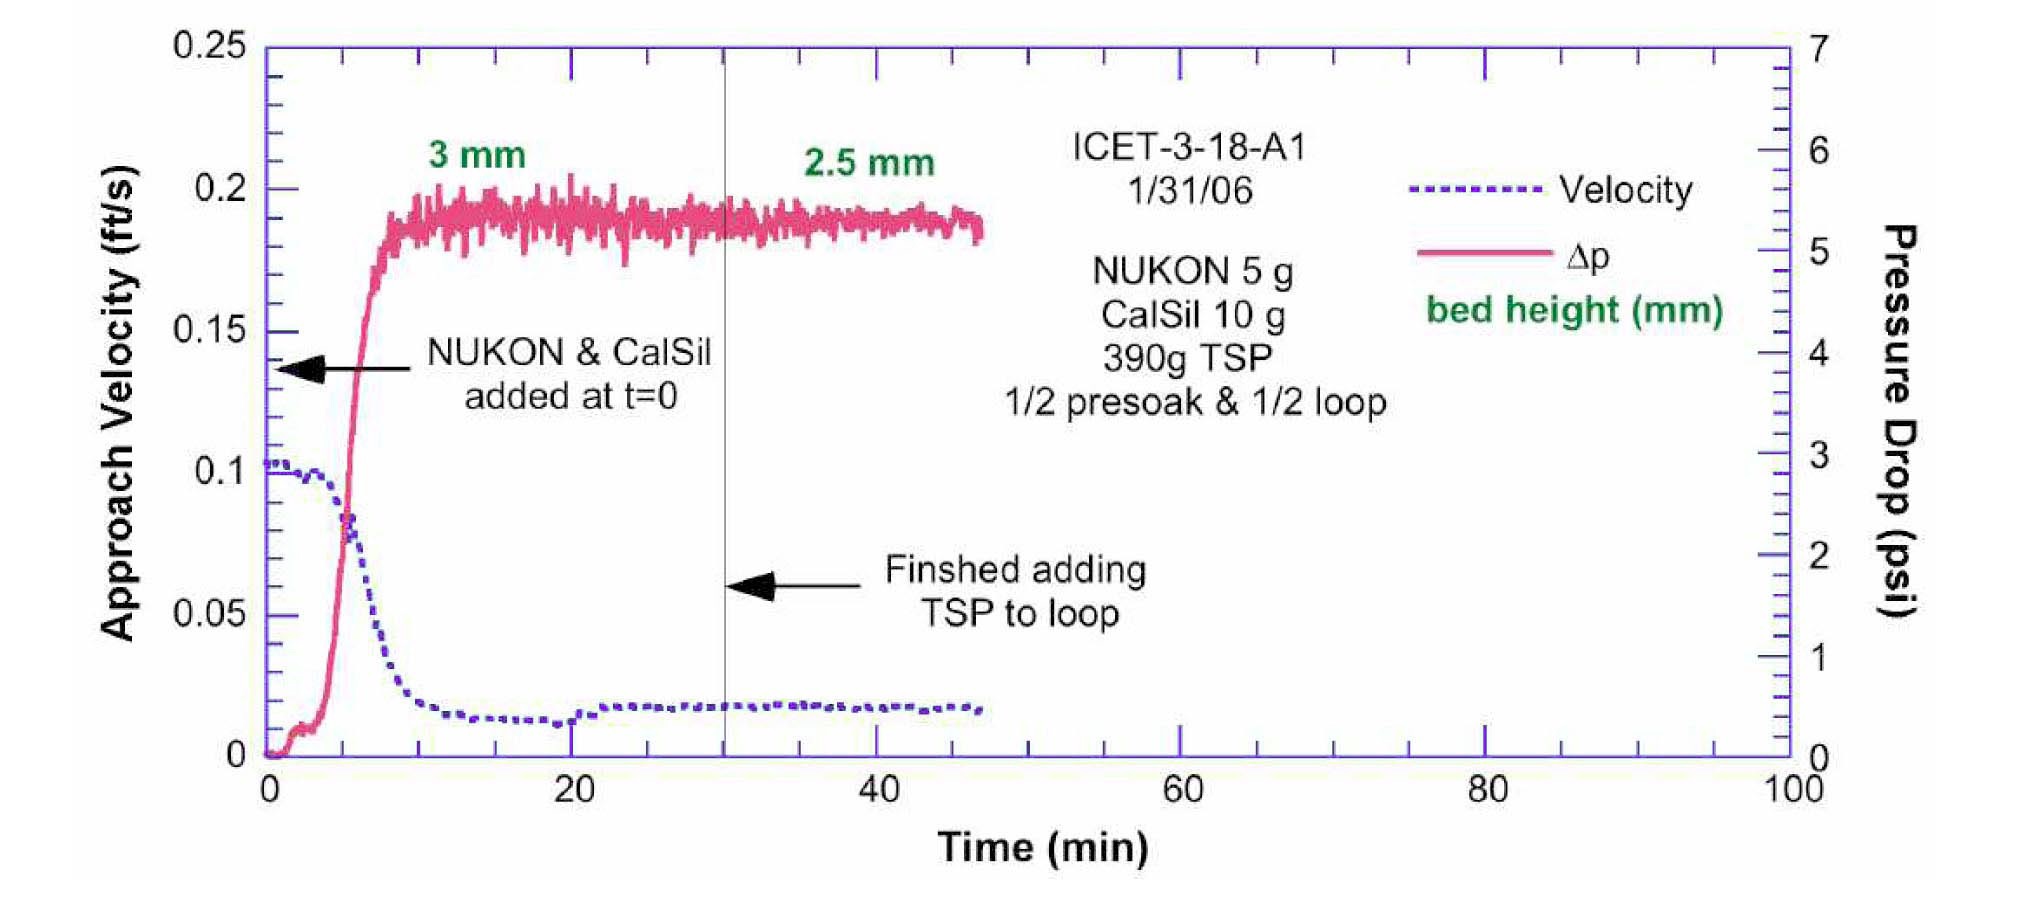 Fiber Debris Bed Approach Velocity and Differential Pressure Across the Strainer as a Function of Time for Test ICET-3-18 with TSP [18]. 1 psi=6.895 kPa; 0.1 ft/s=0.03 m/s.